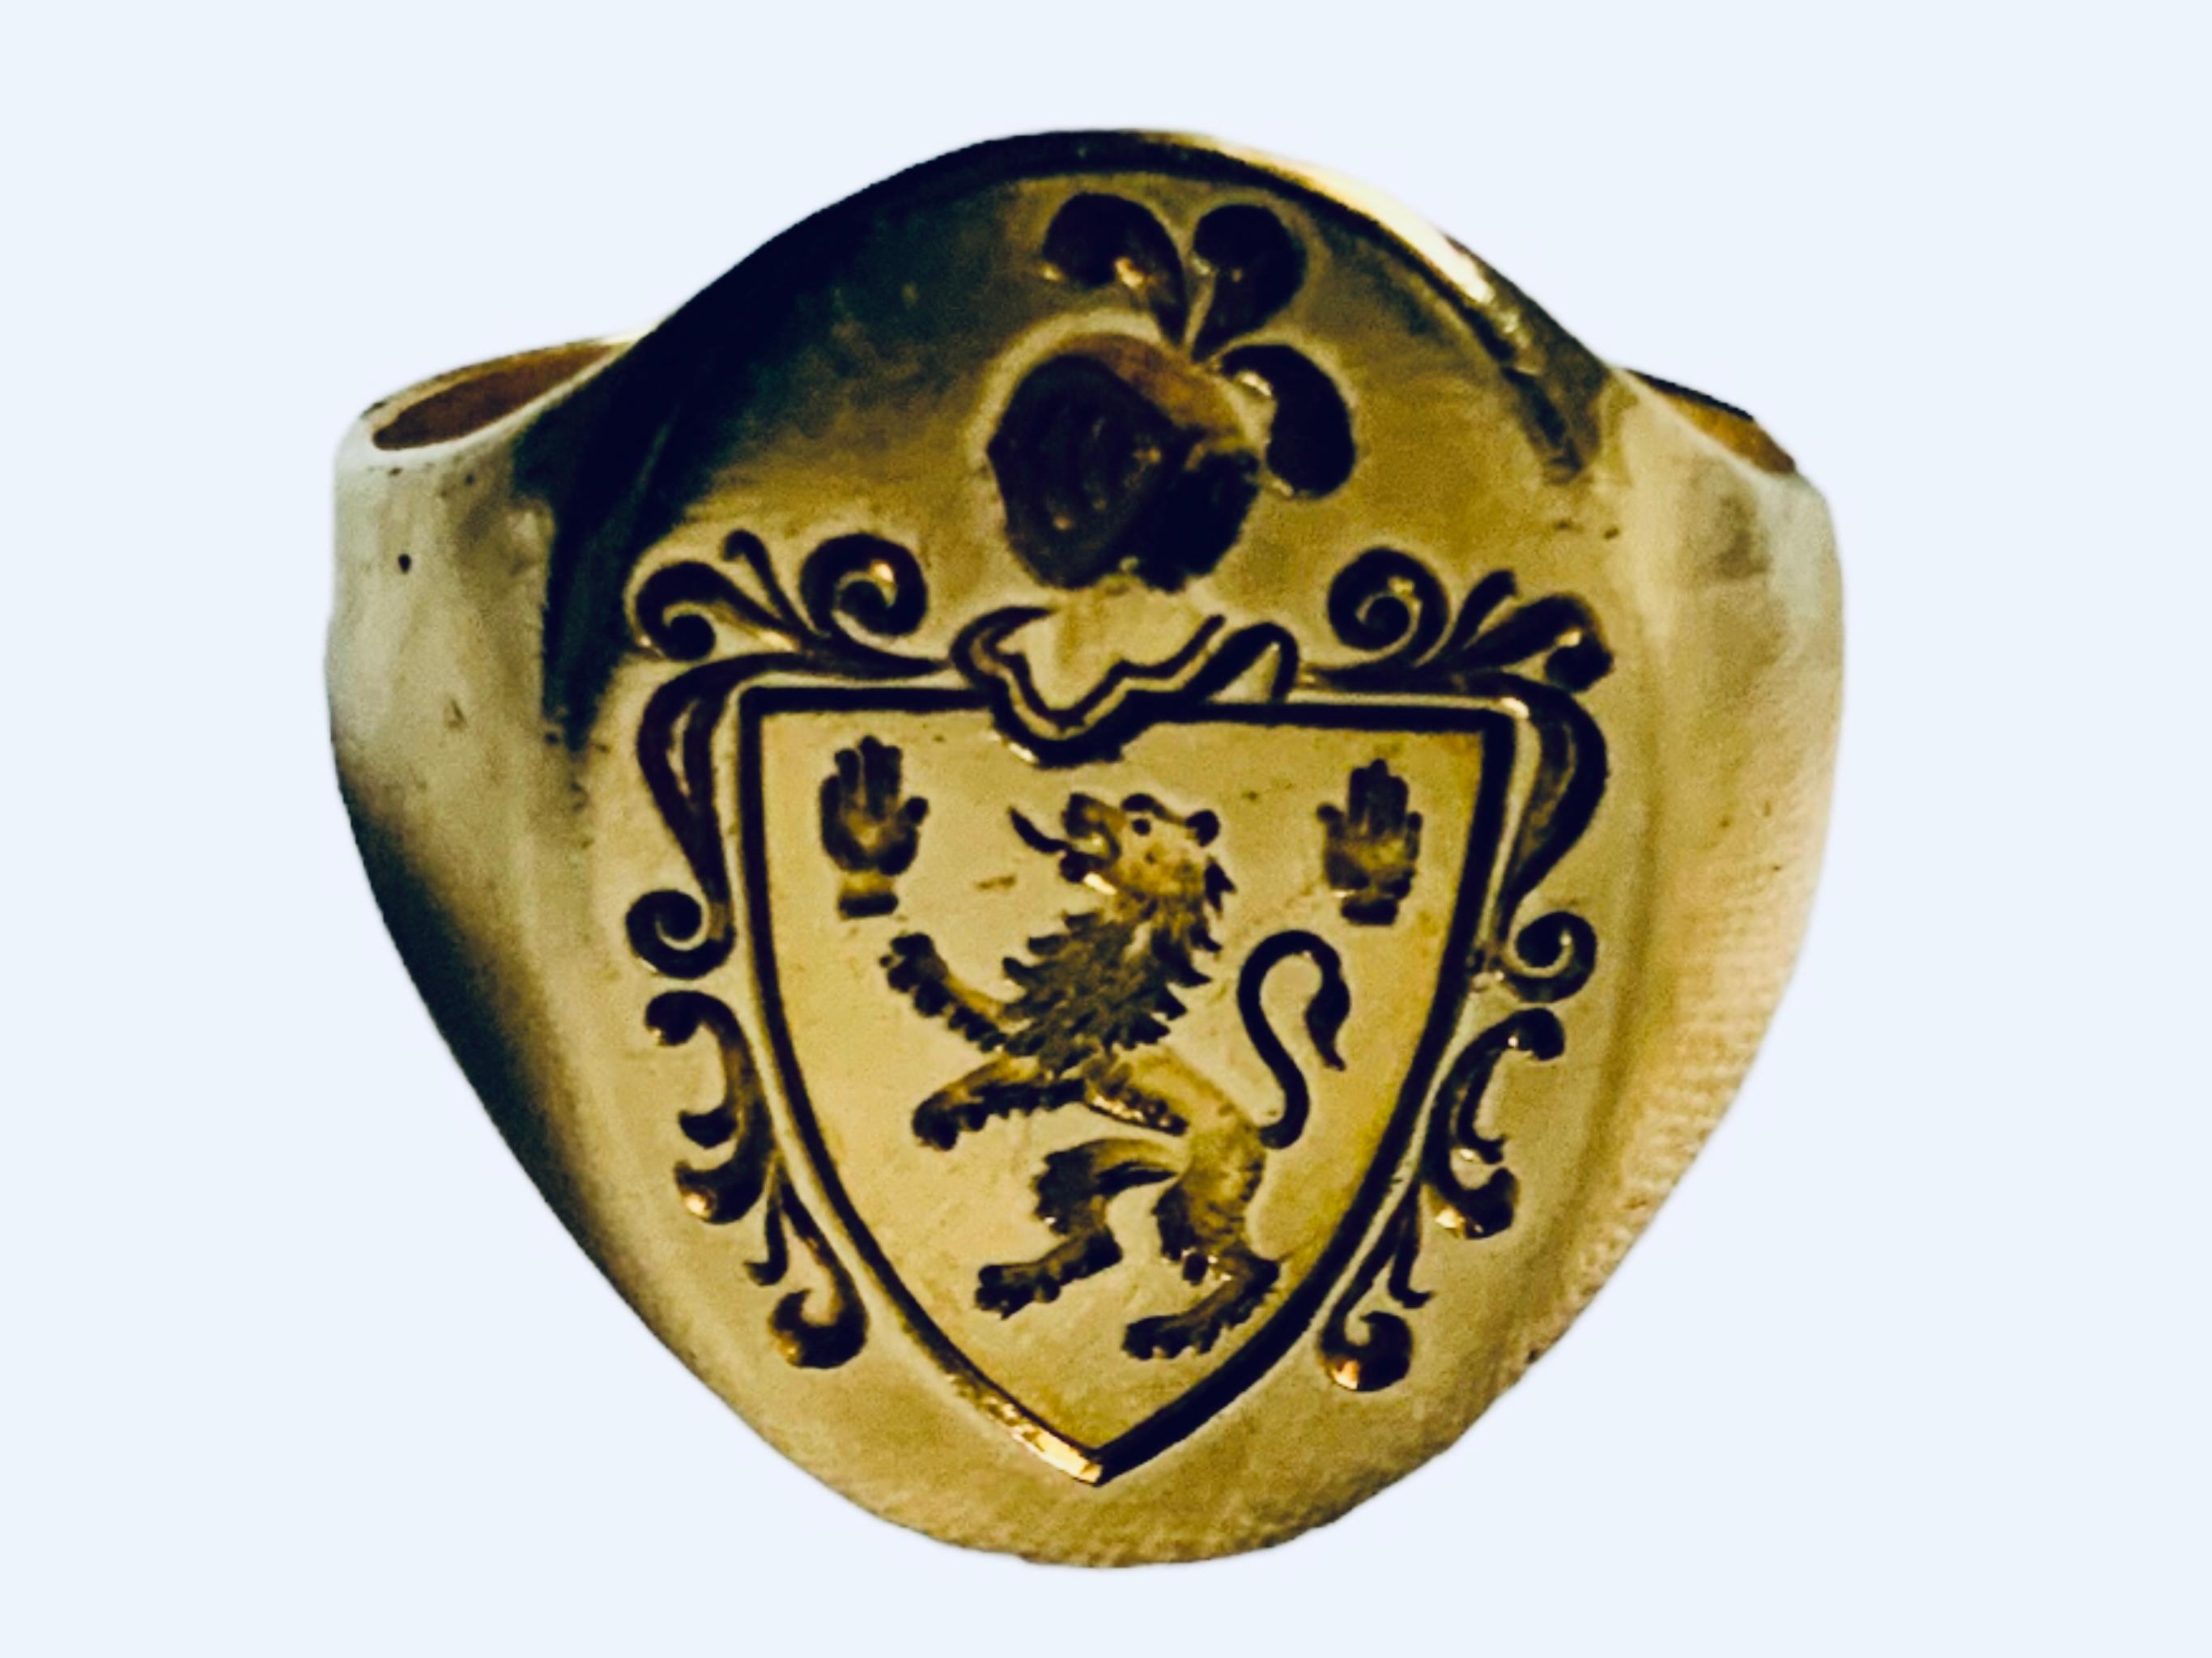 This is an 18K Yellow Gold Signet Heraldic Ring. It depicts a gold ring that has an oval shaped top embellished with an engraved family’s crest or coat of arms. Inside the shield, there is a lion rampant and two hands engraved. A armor helmet